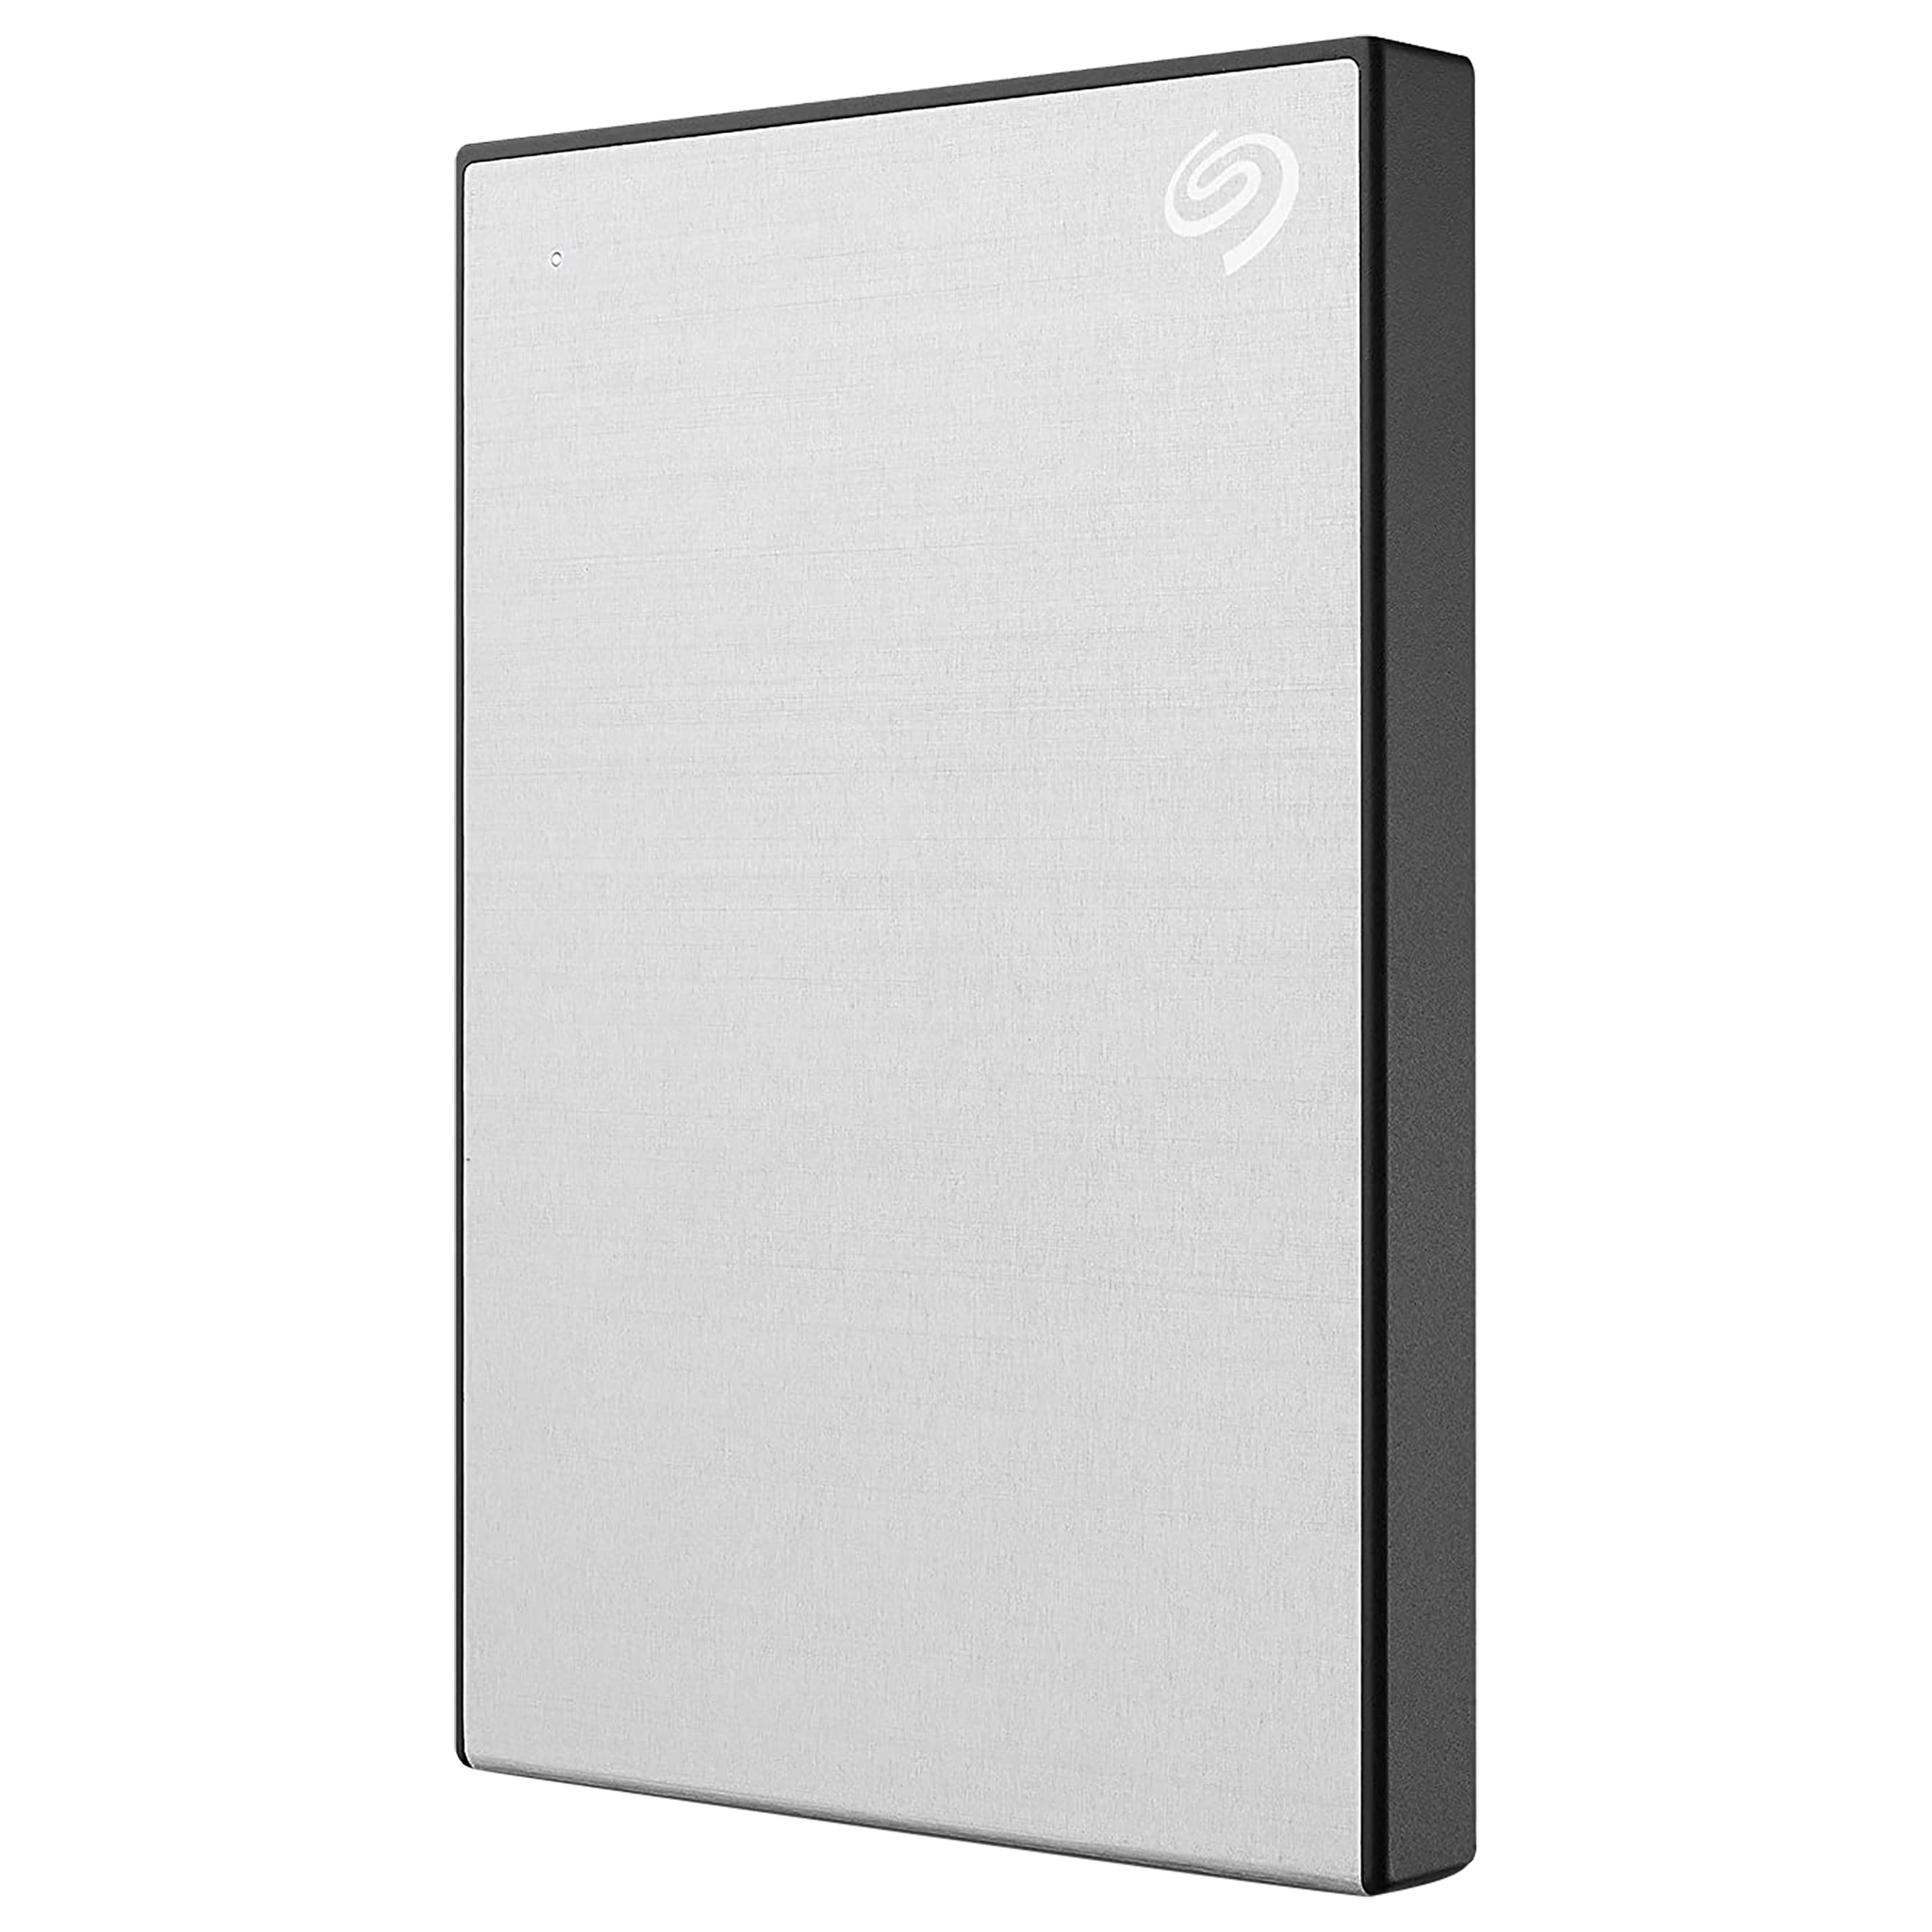 Seagate One Touch 1TB USB 3.0 Hard Disk Drive (Advanced Password Protection, STKY1000401, Silver)